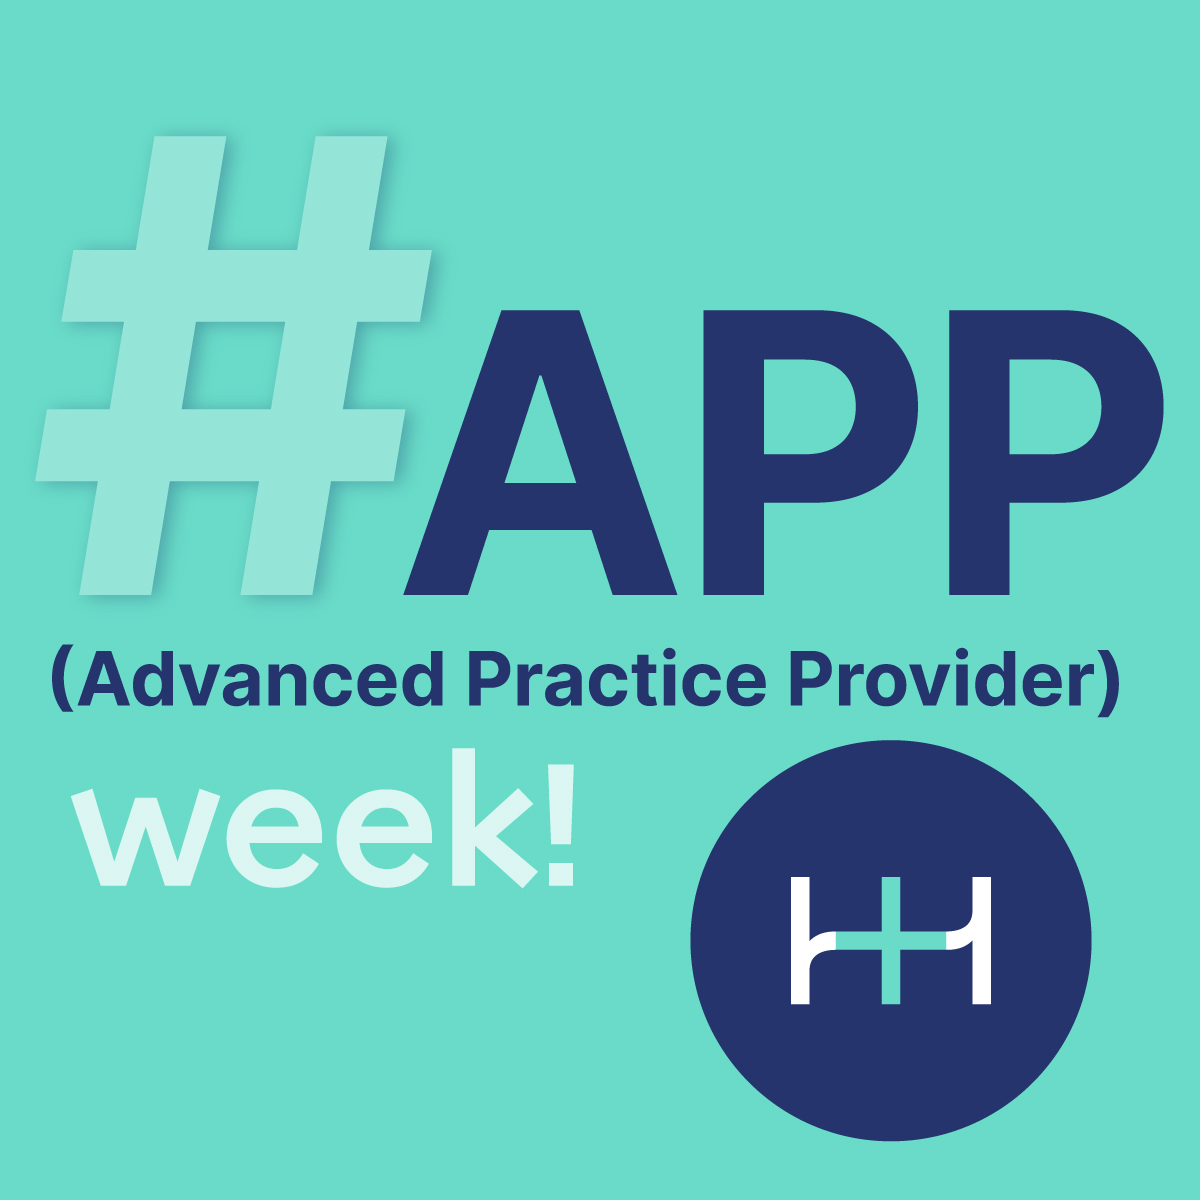 During National Advanced Practice Provider Week, we celebrate ALL of our advanced practice providers and their important roles in caring for clients! #APPWeek2023 #advancedpracticeproviders #harborhealth